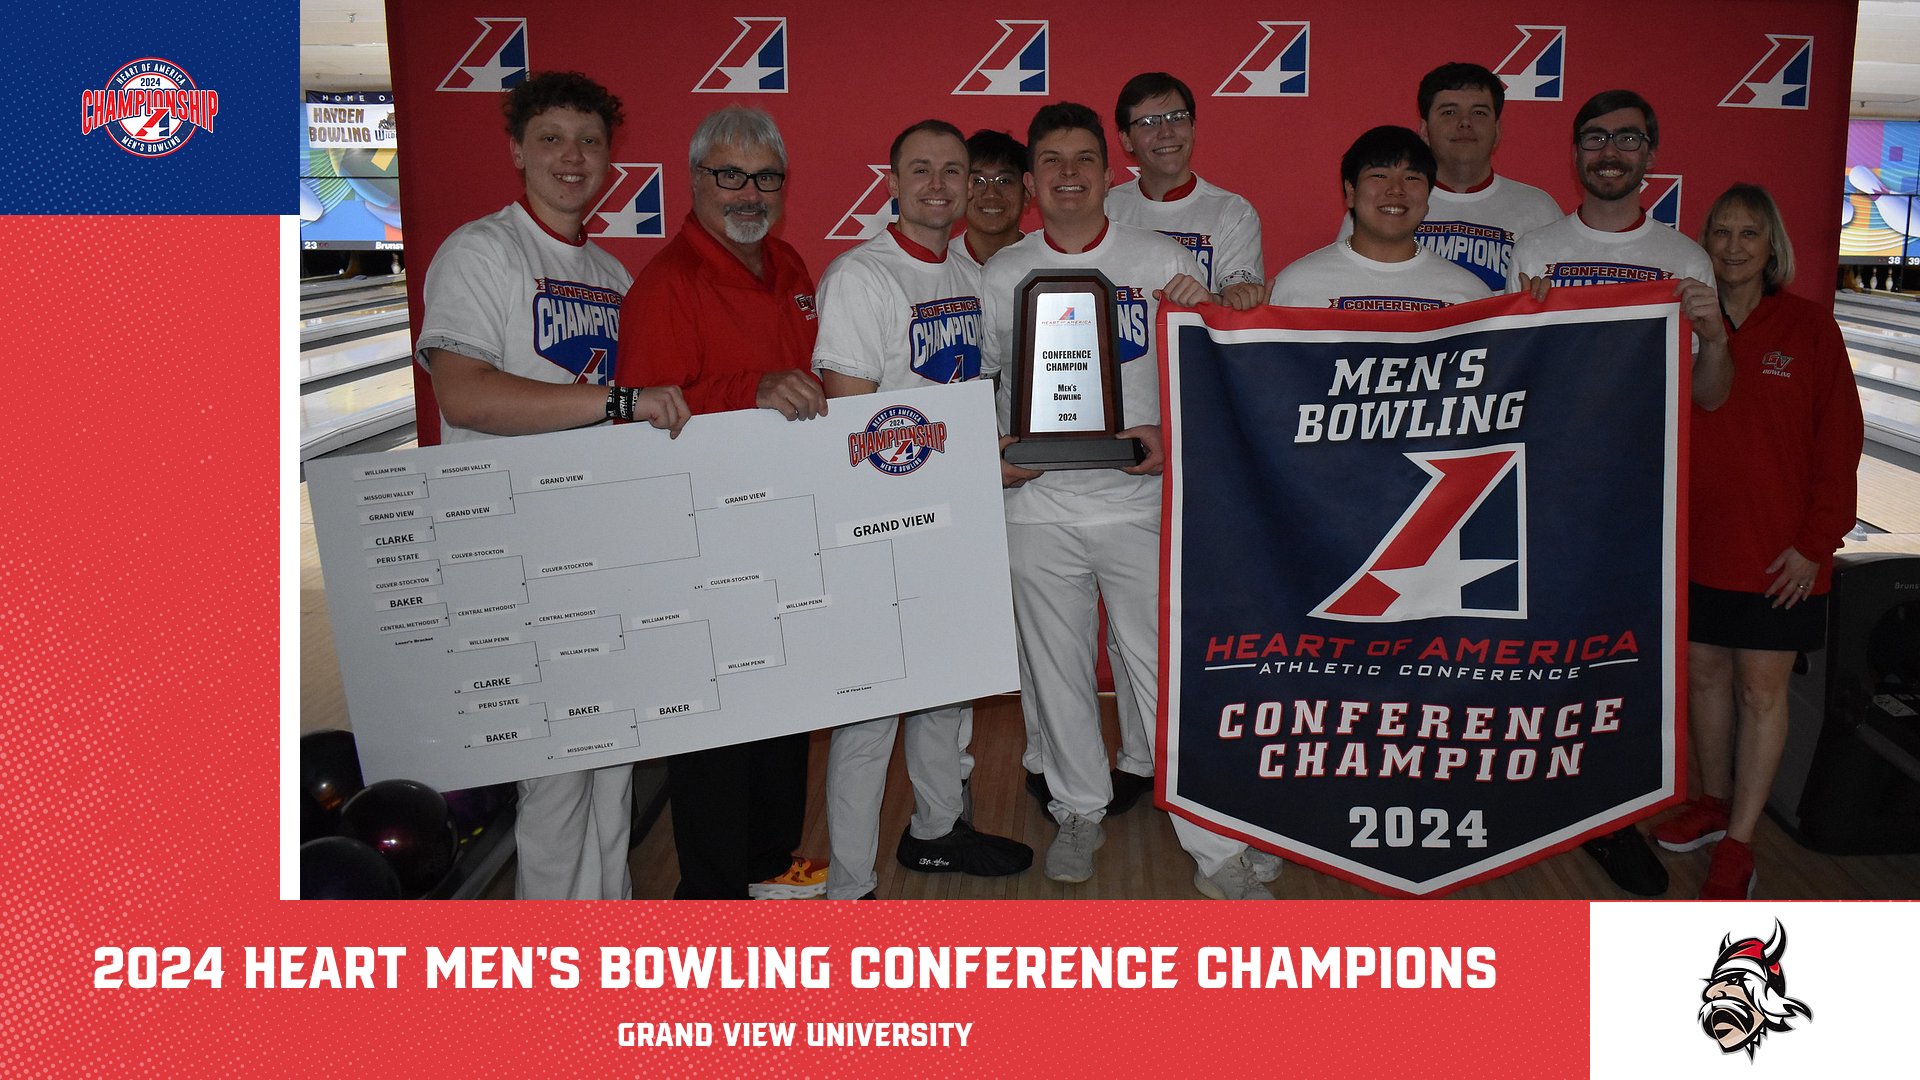 Grand View University Wins 2024 Heart Men’s Bowling Conference Championship